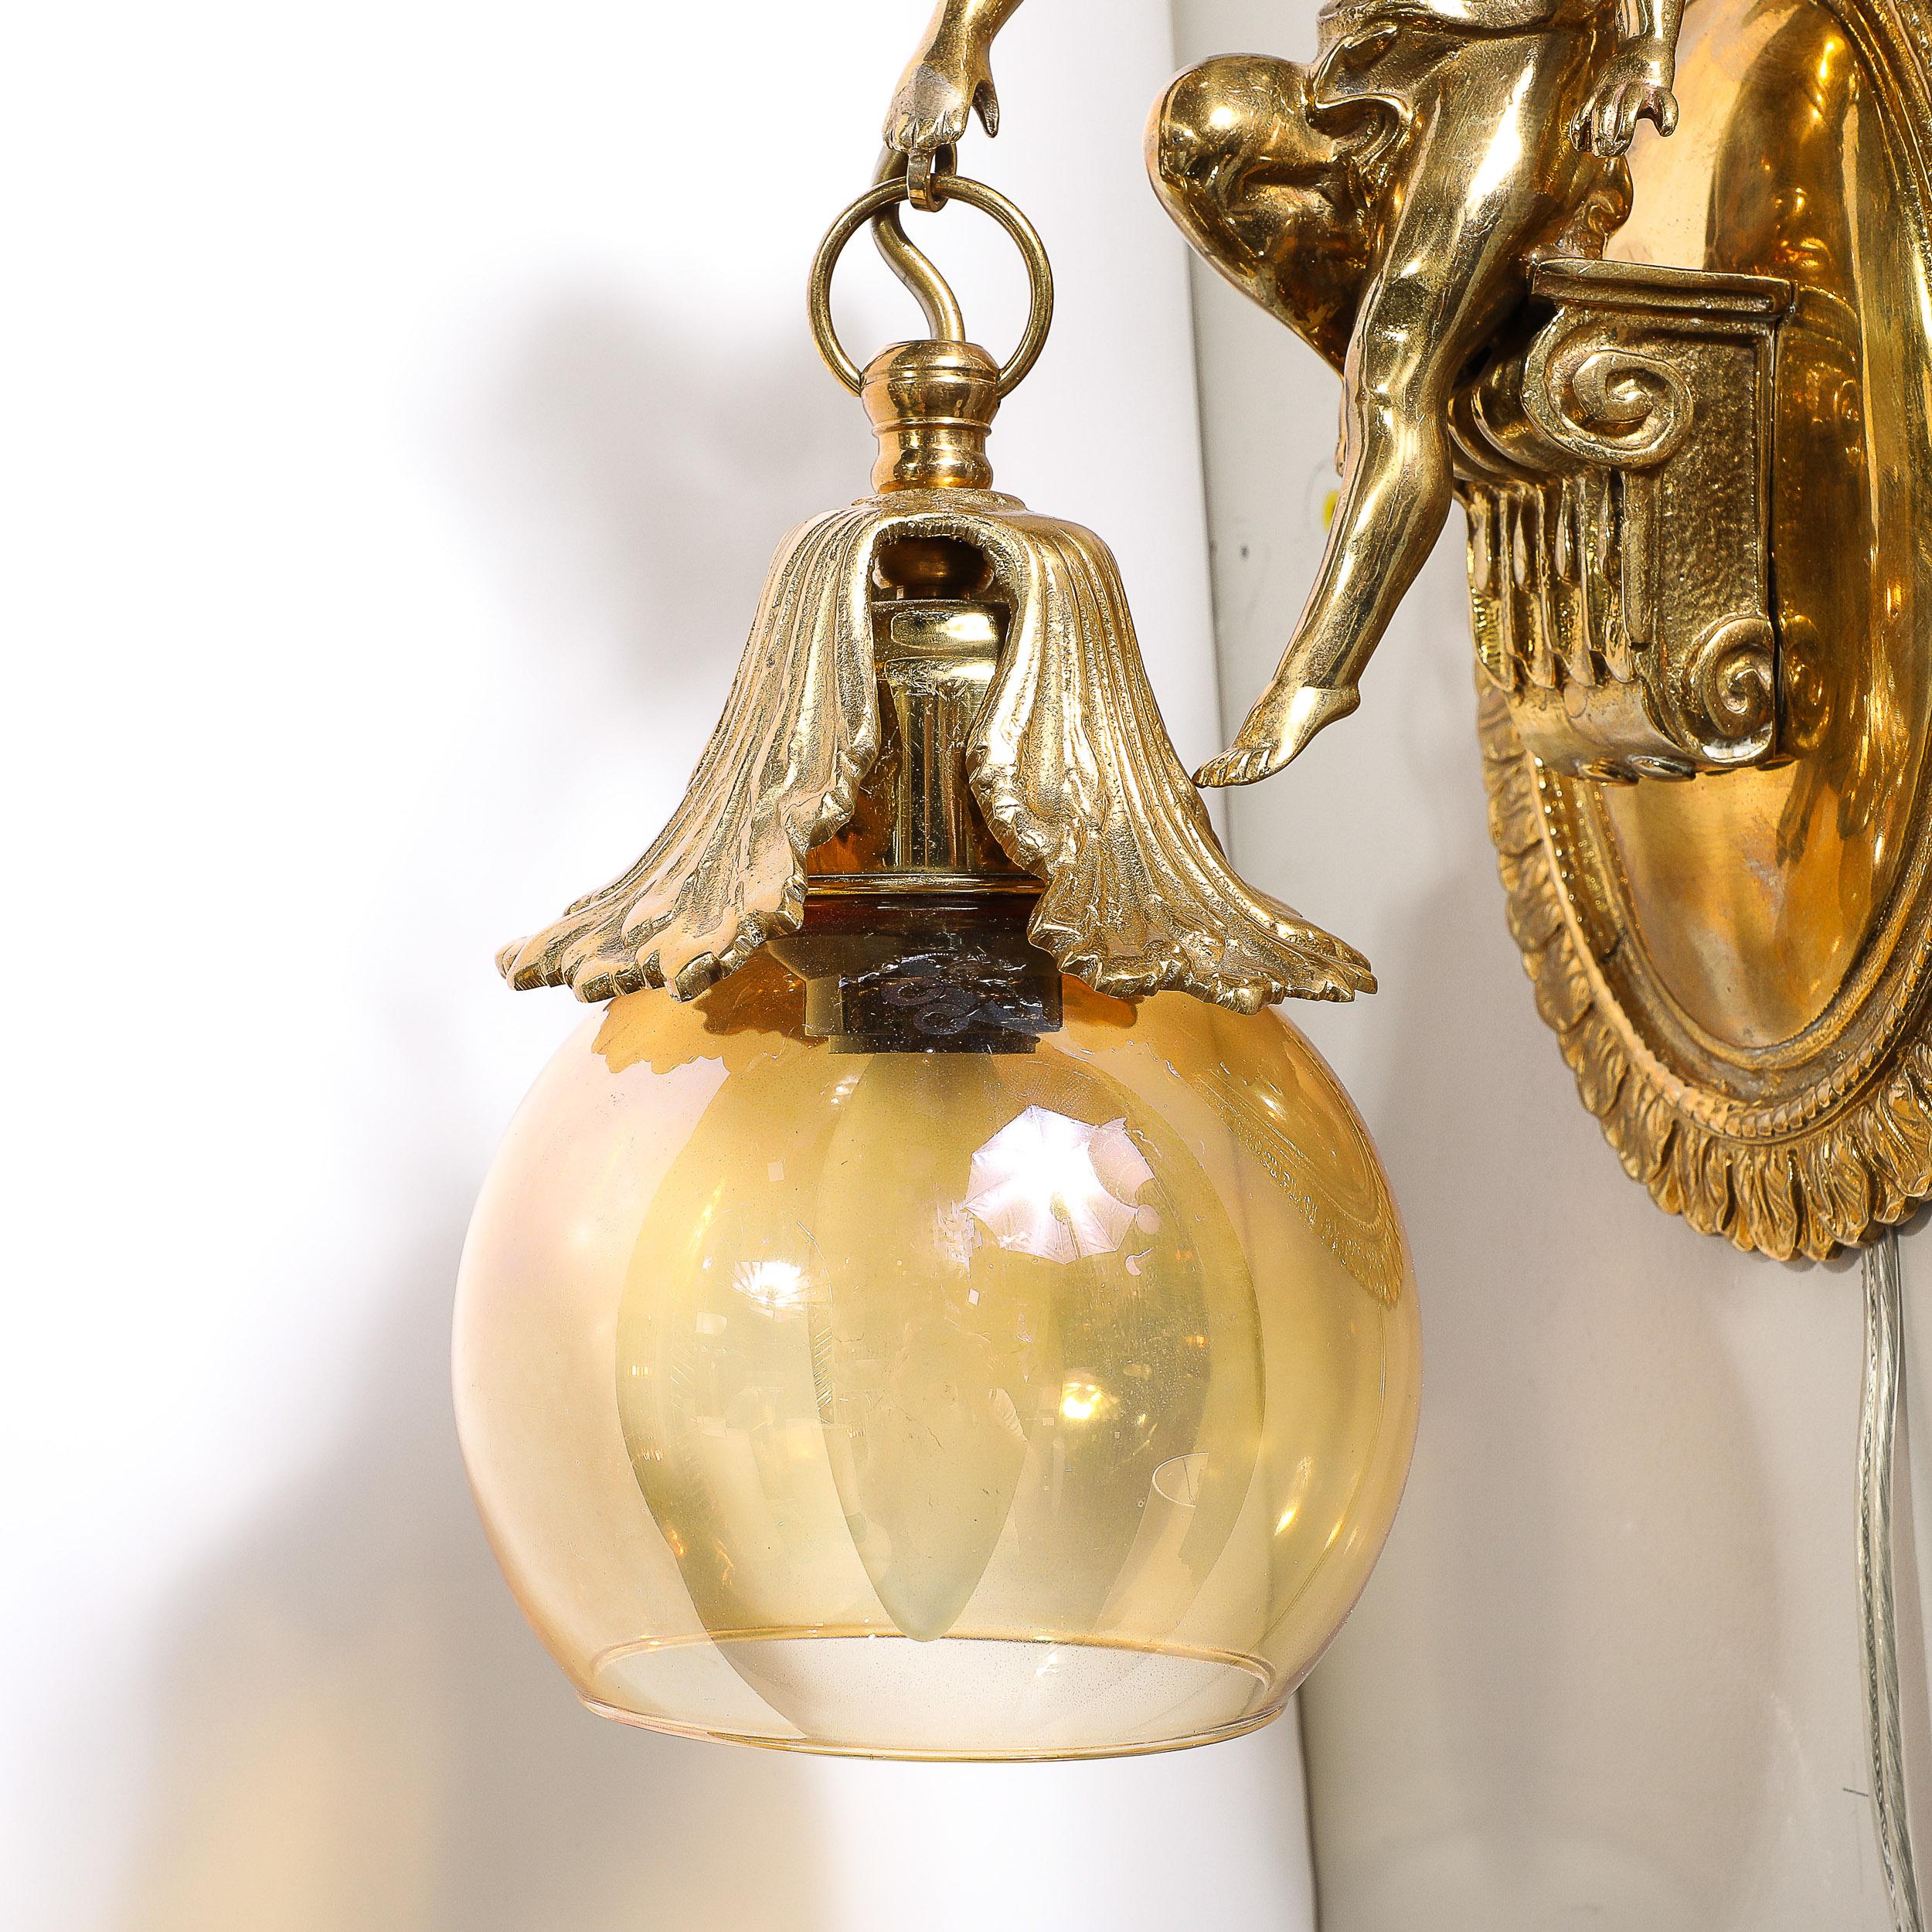 Pair of Neoclassical Cherub Sconces in Antique Brass w/ Smoked Amber Shades For Sale 11